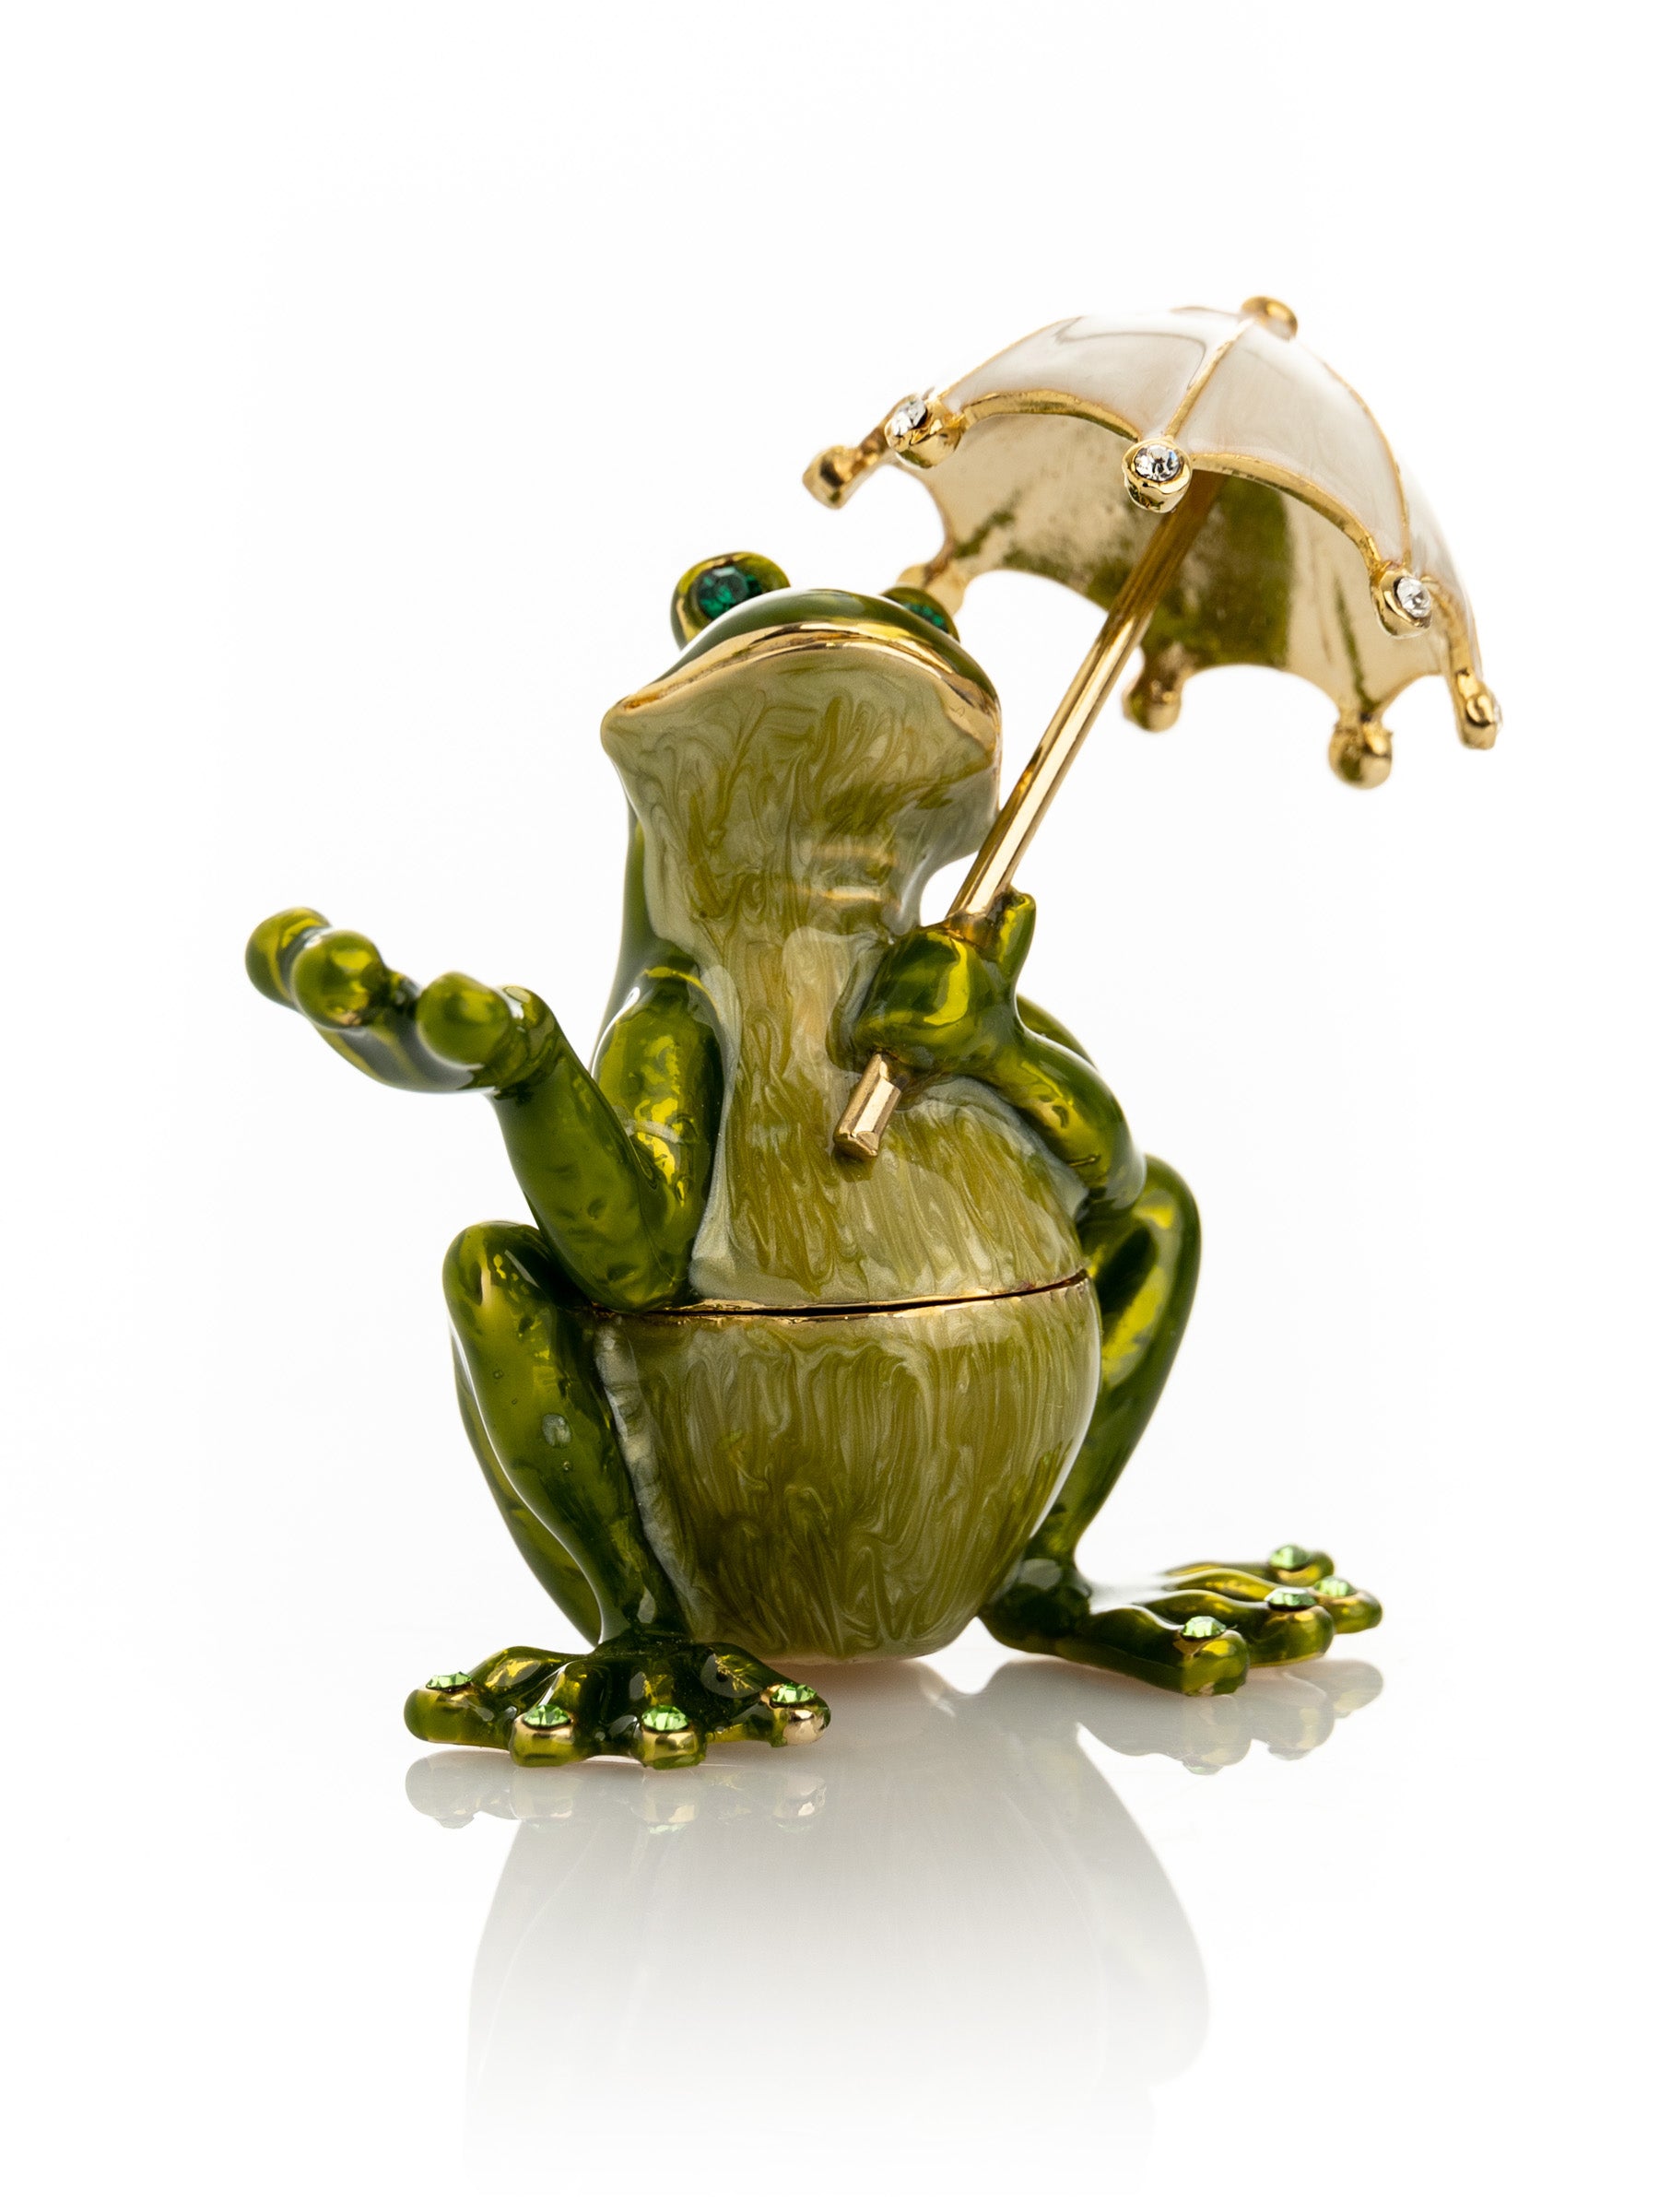 Frog with an Umbrella